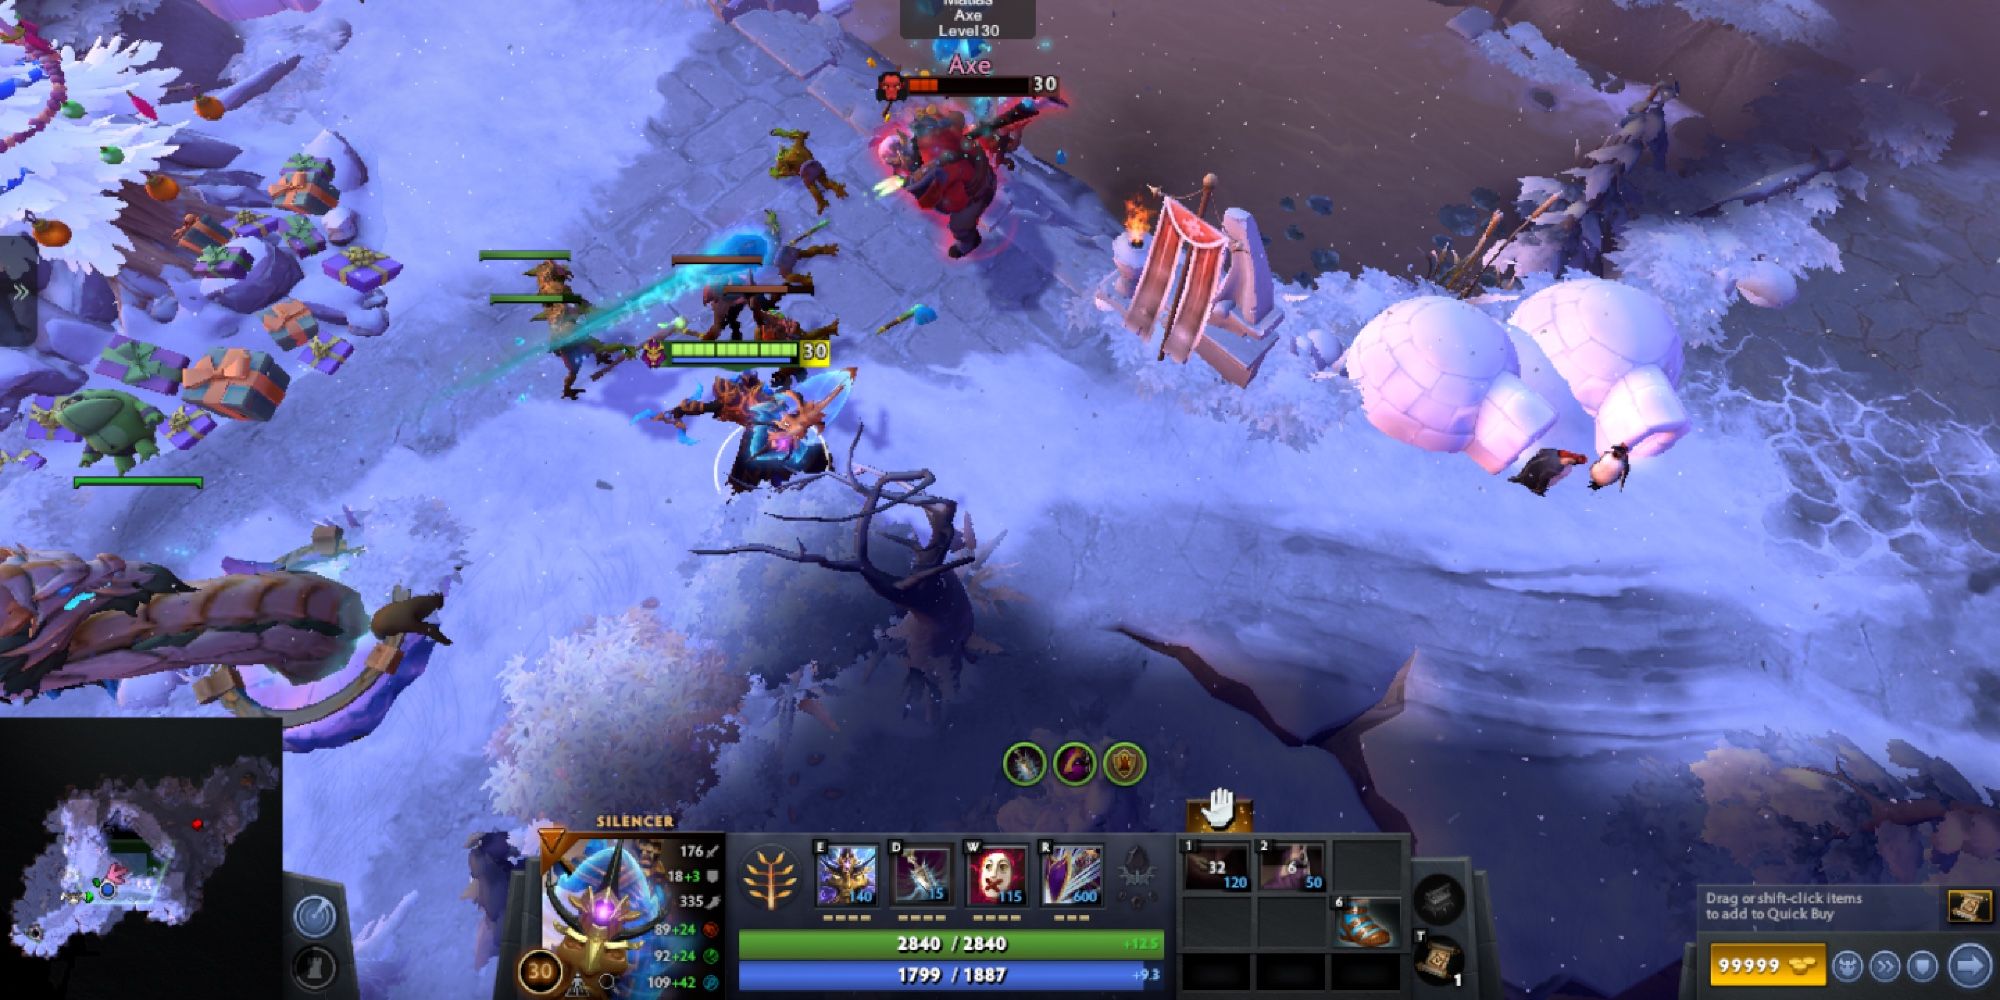 Dota 2 - Veil of Discord And Dagon - Player casts spells on enemy